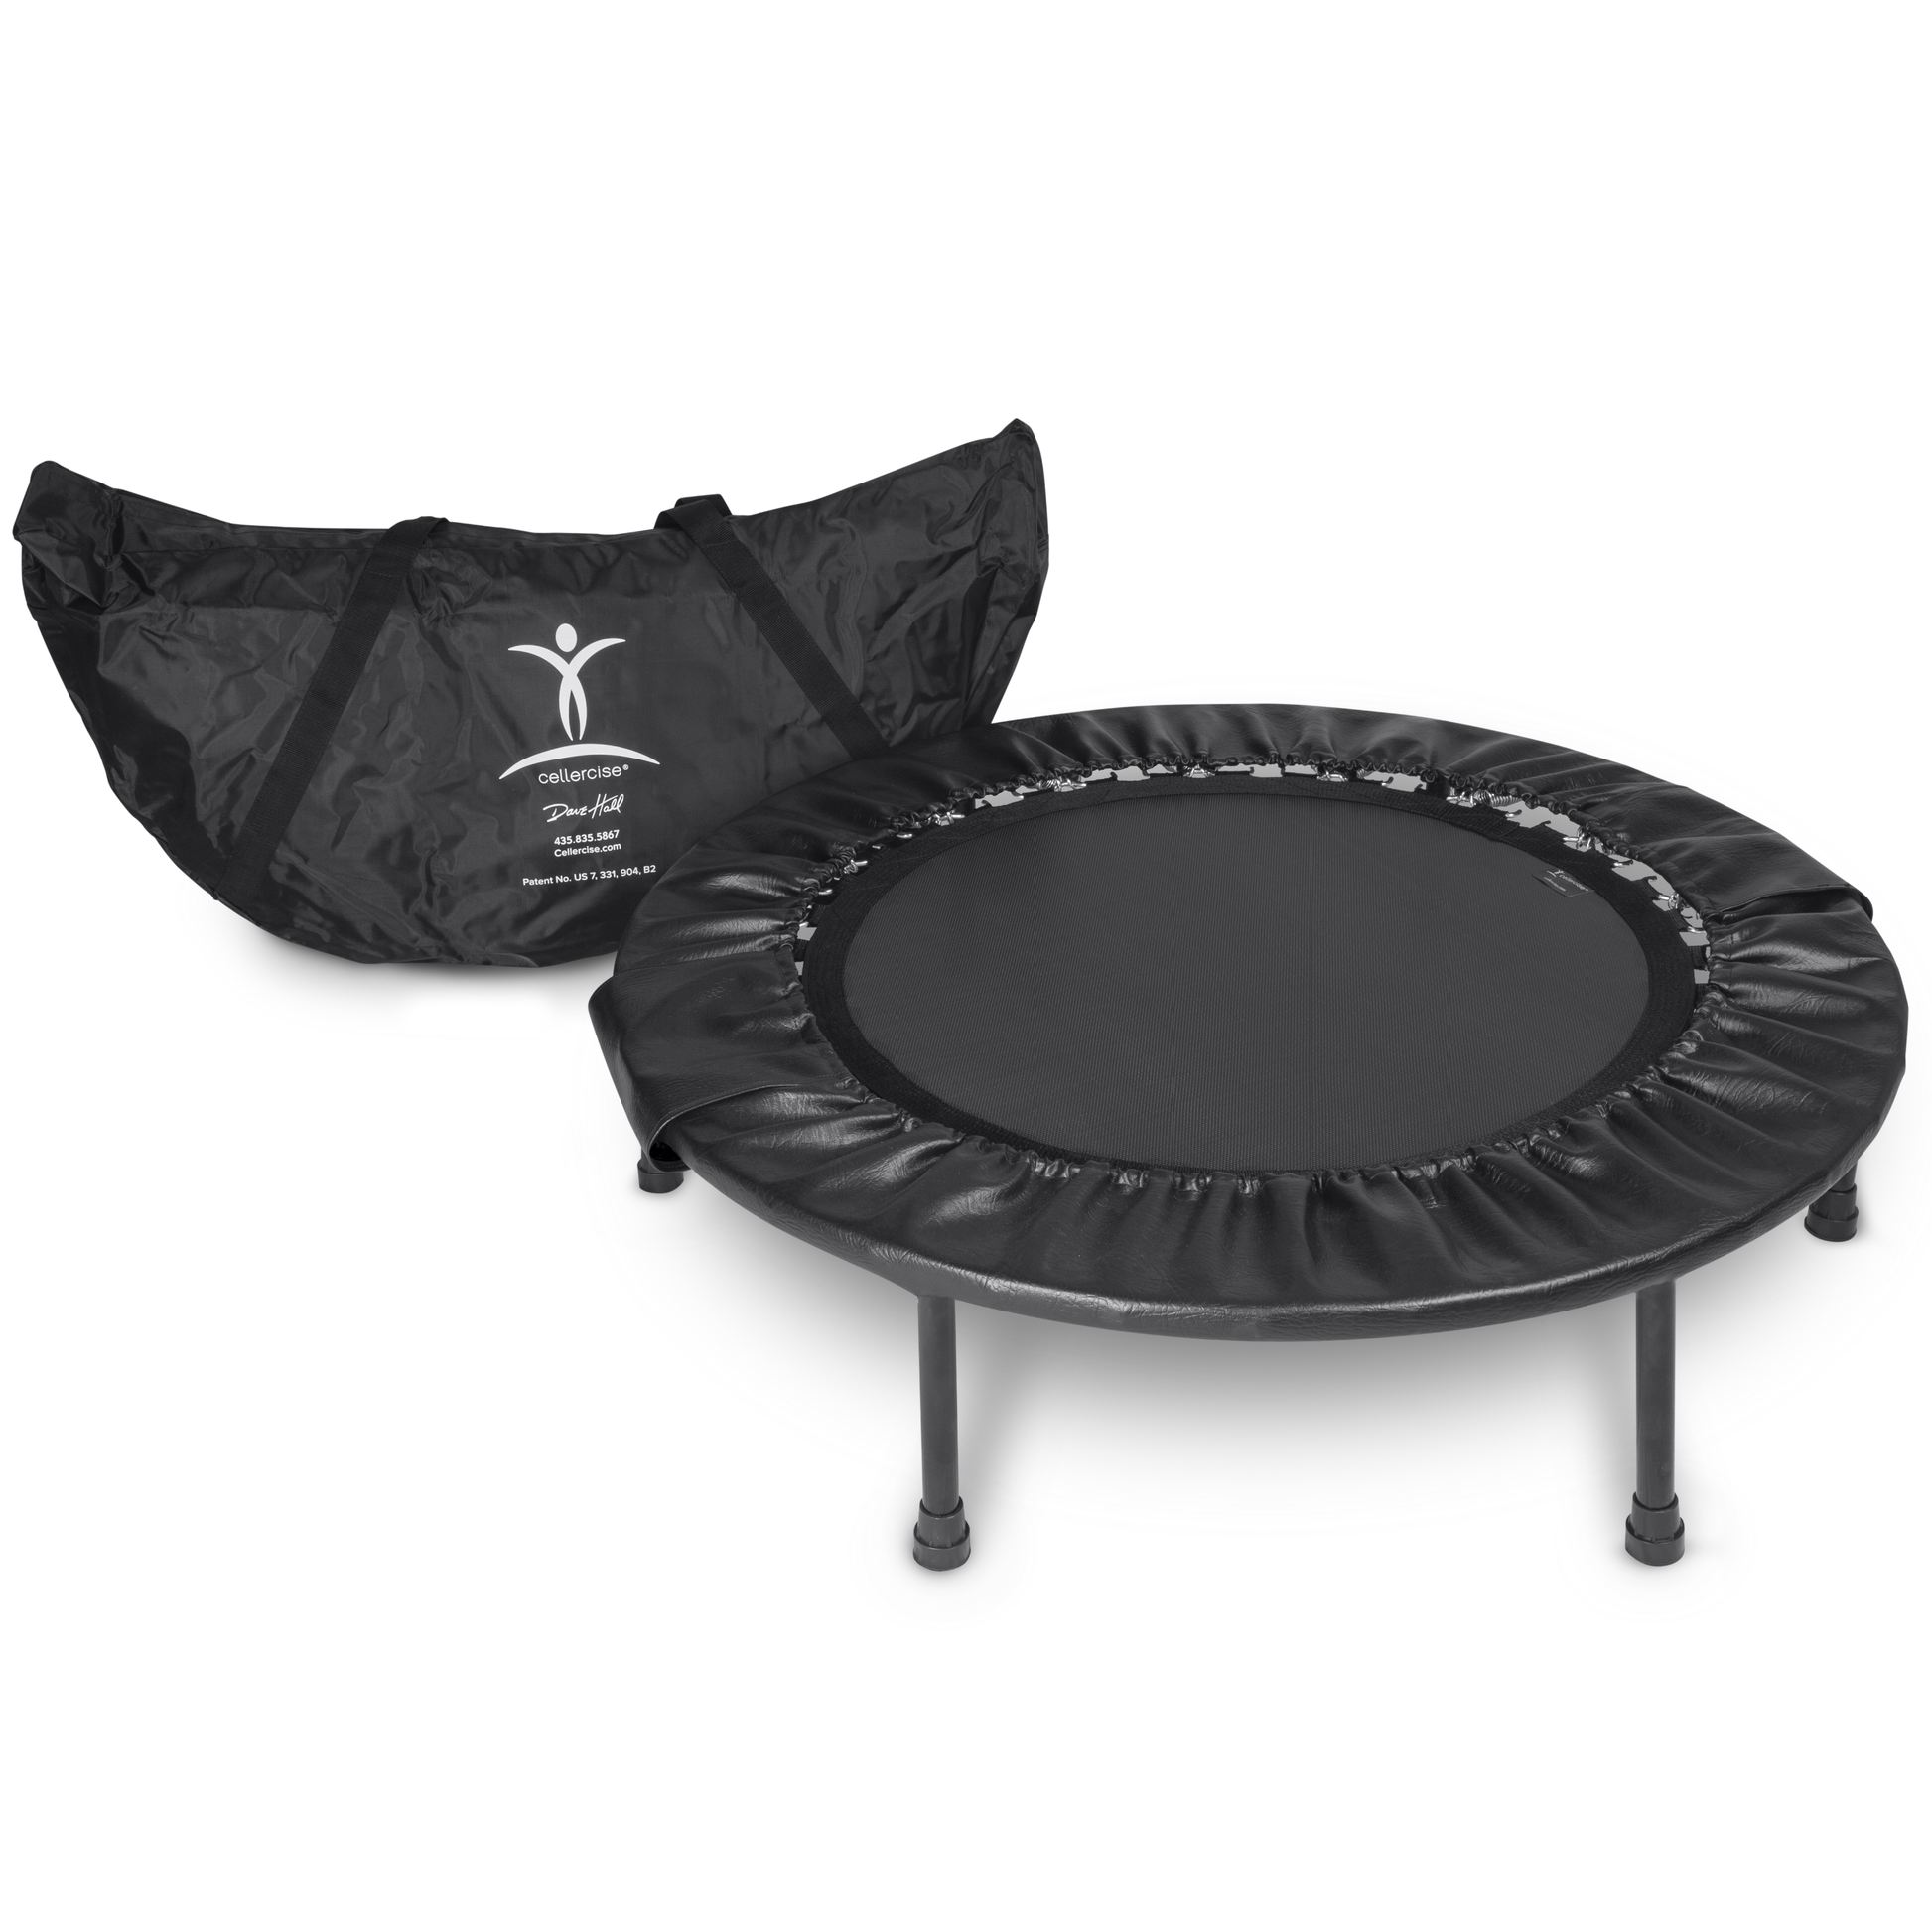 cellerciser rebounder mini trampoline half fold home gym with carrying case